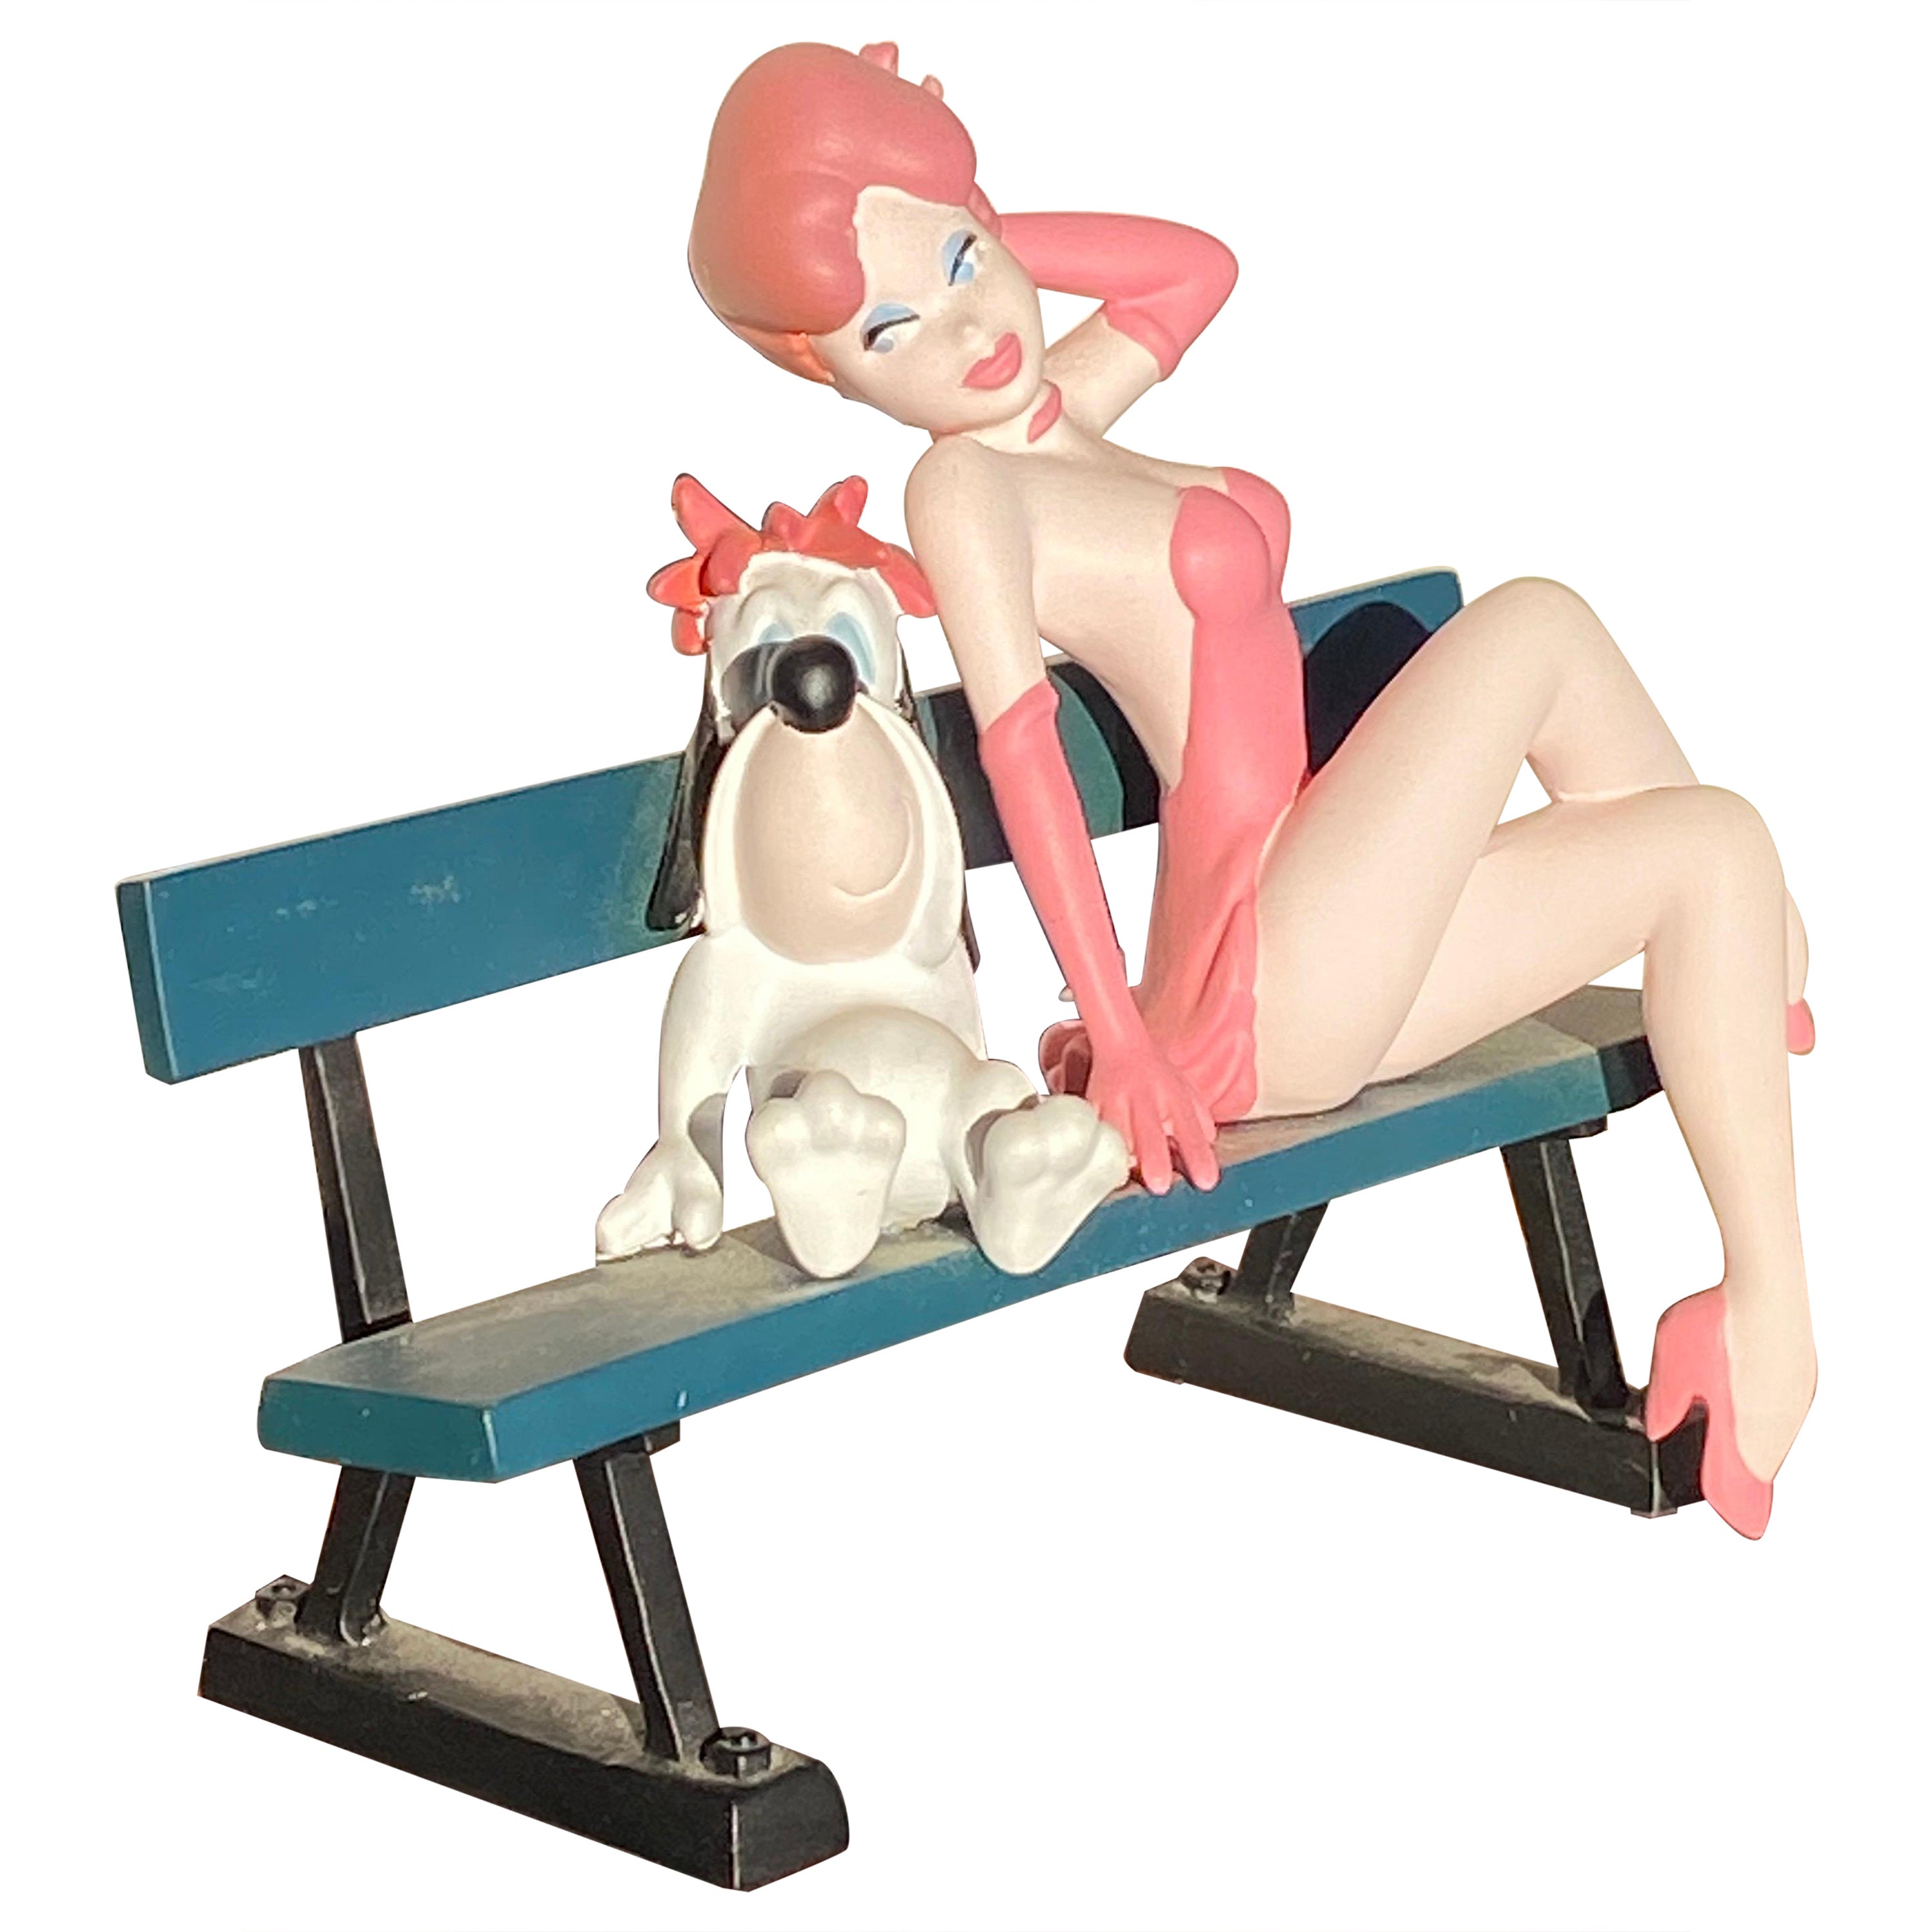 Rare and Collectable Droopy and Girl by Demons & Merveilles Figurine Statue For Sale